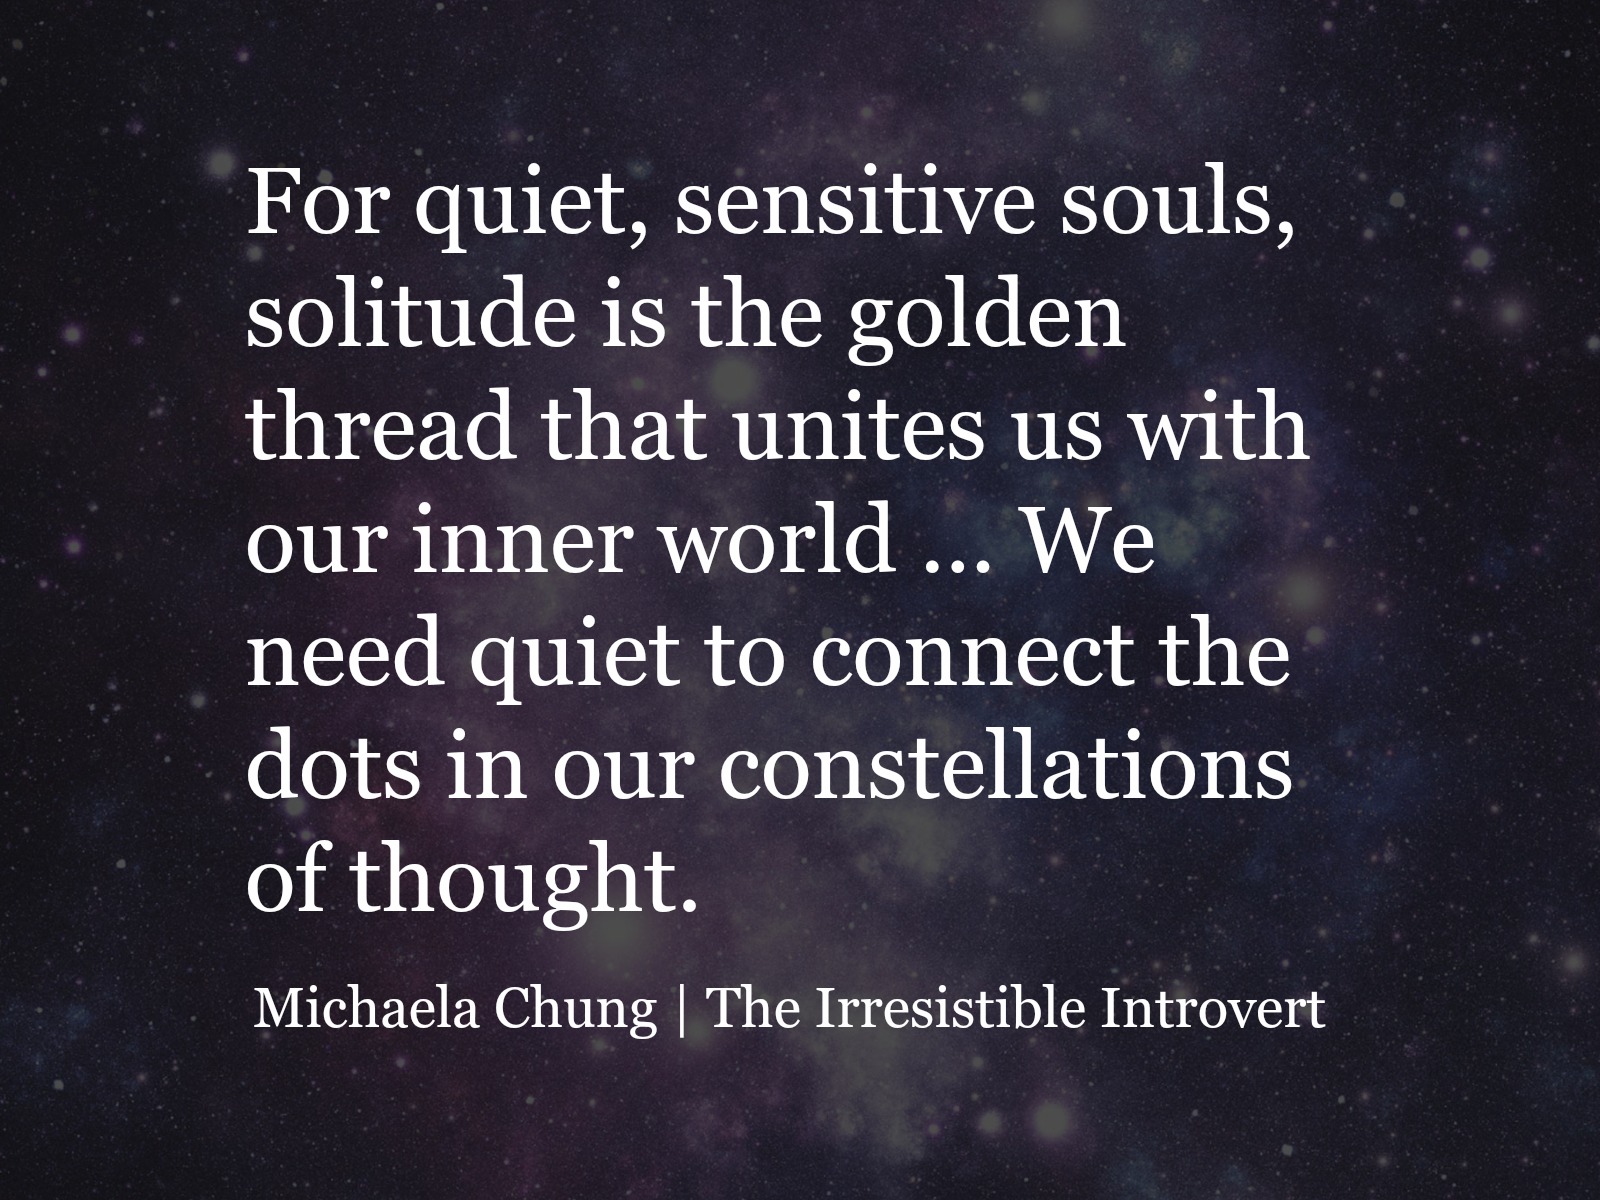 Irresistible Introvert Quote 2